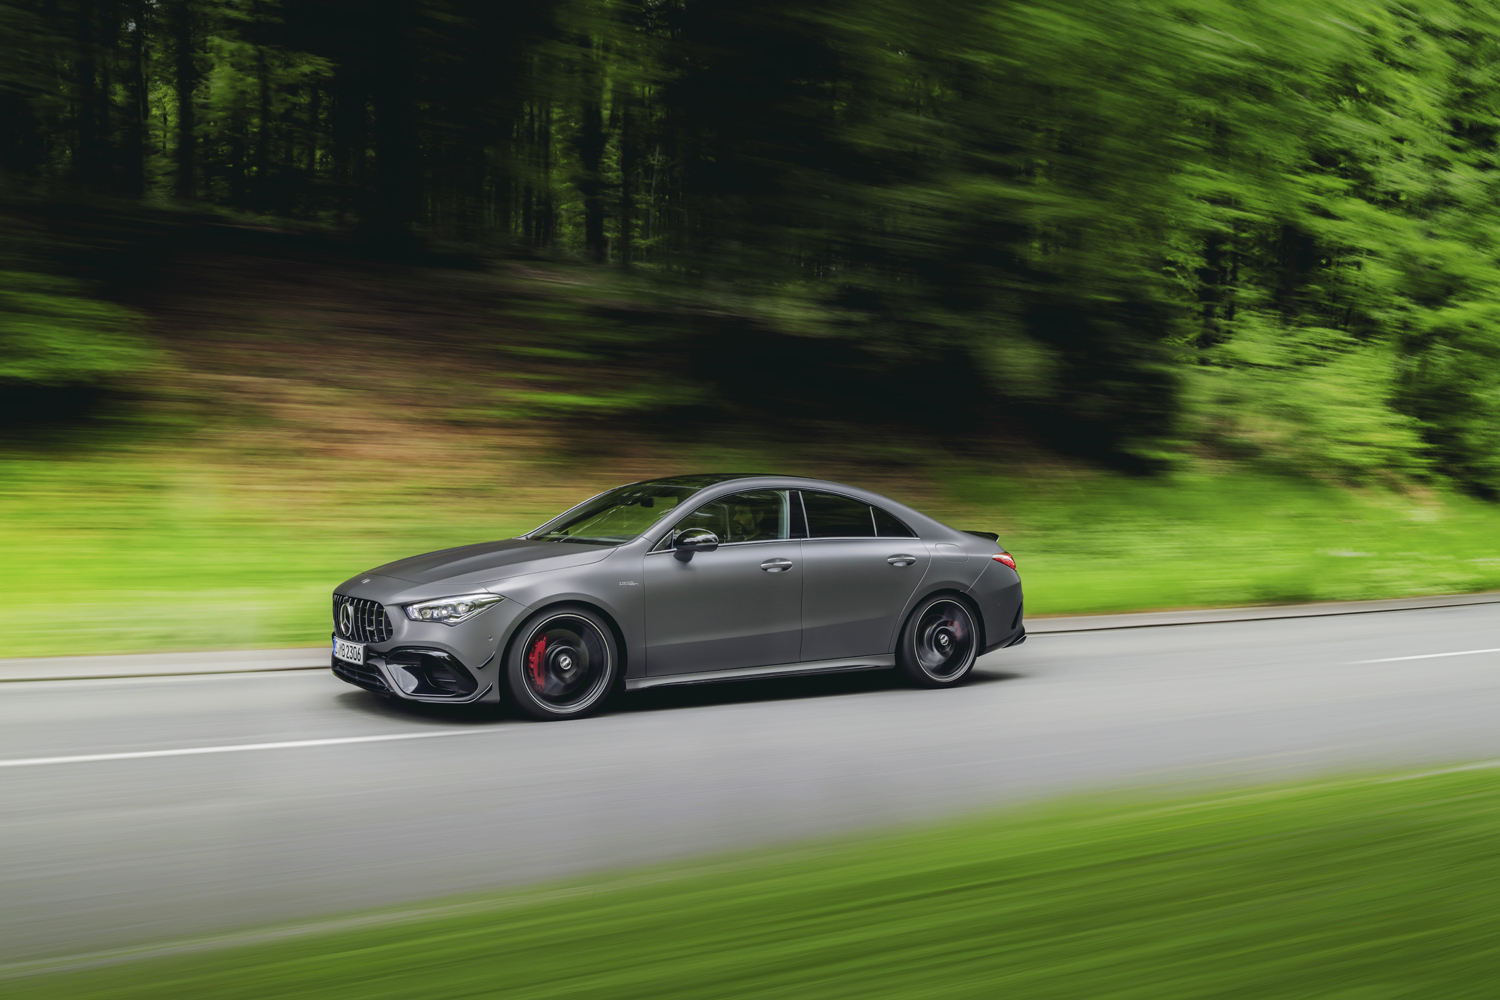 2020 mercedes benz cla keeps design led styling gets more tech ces 2019 amg 45 s 4matic